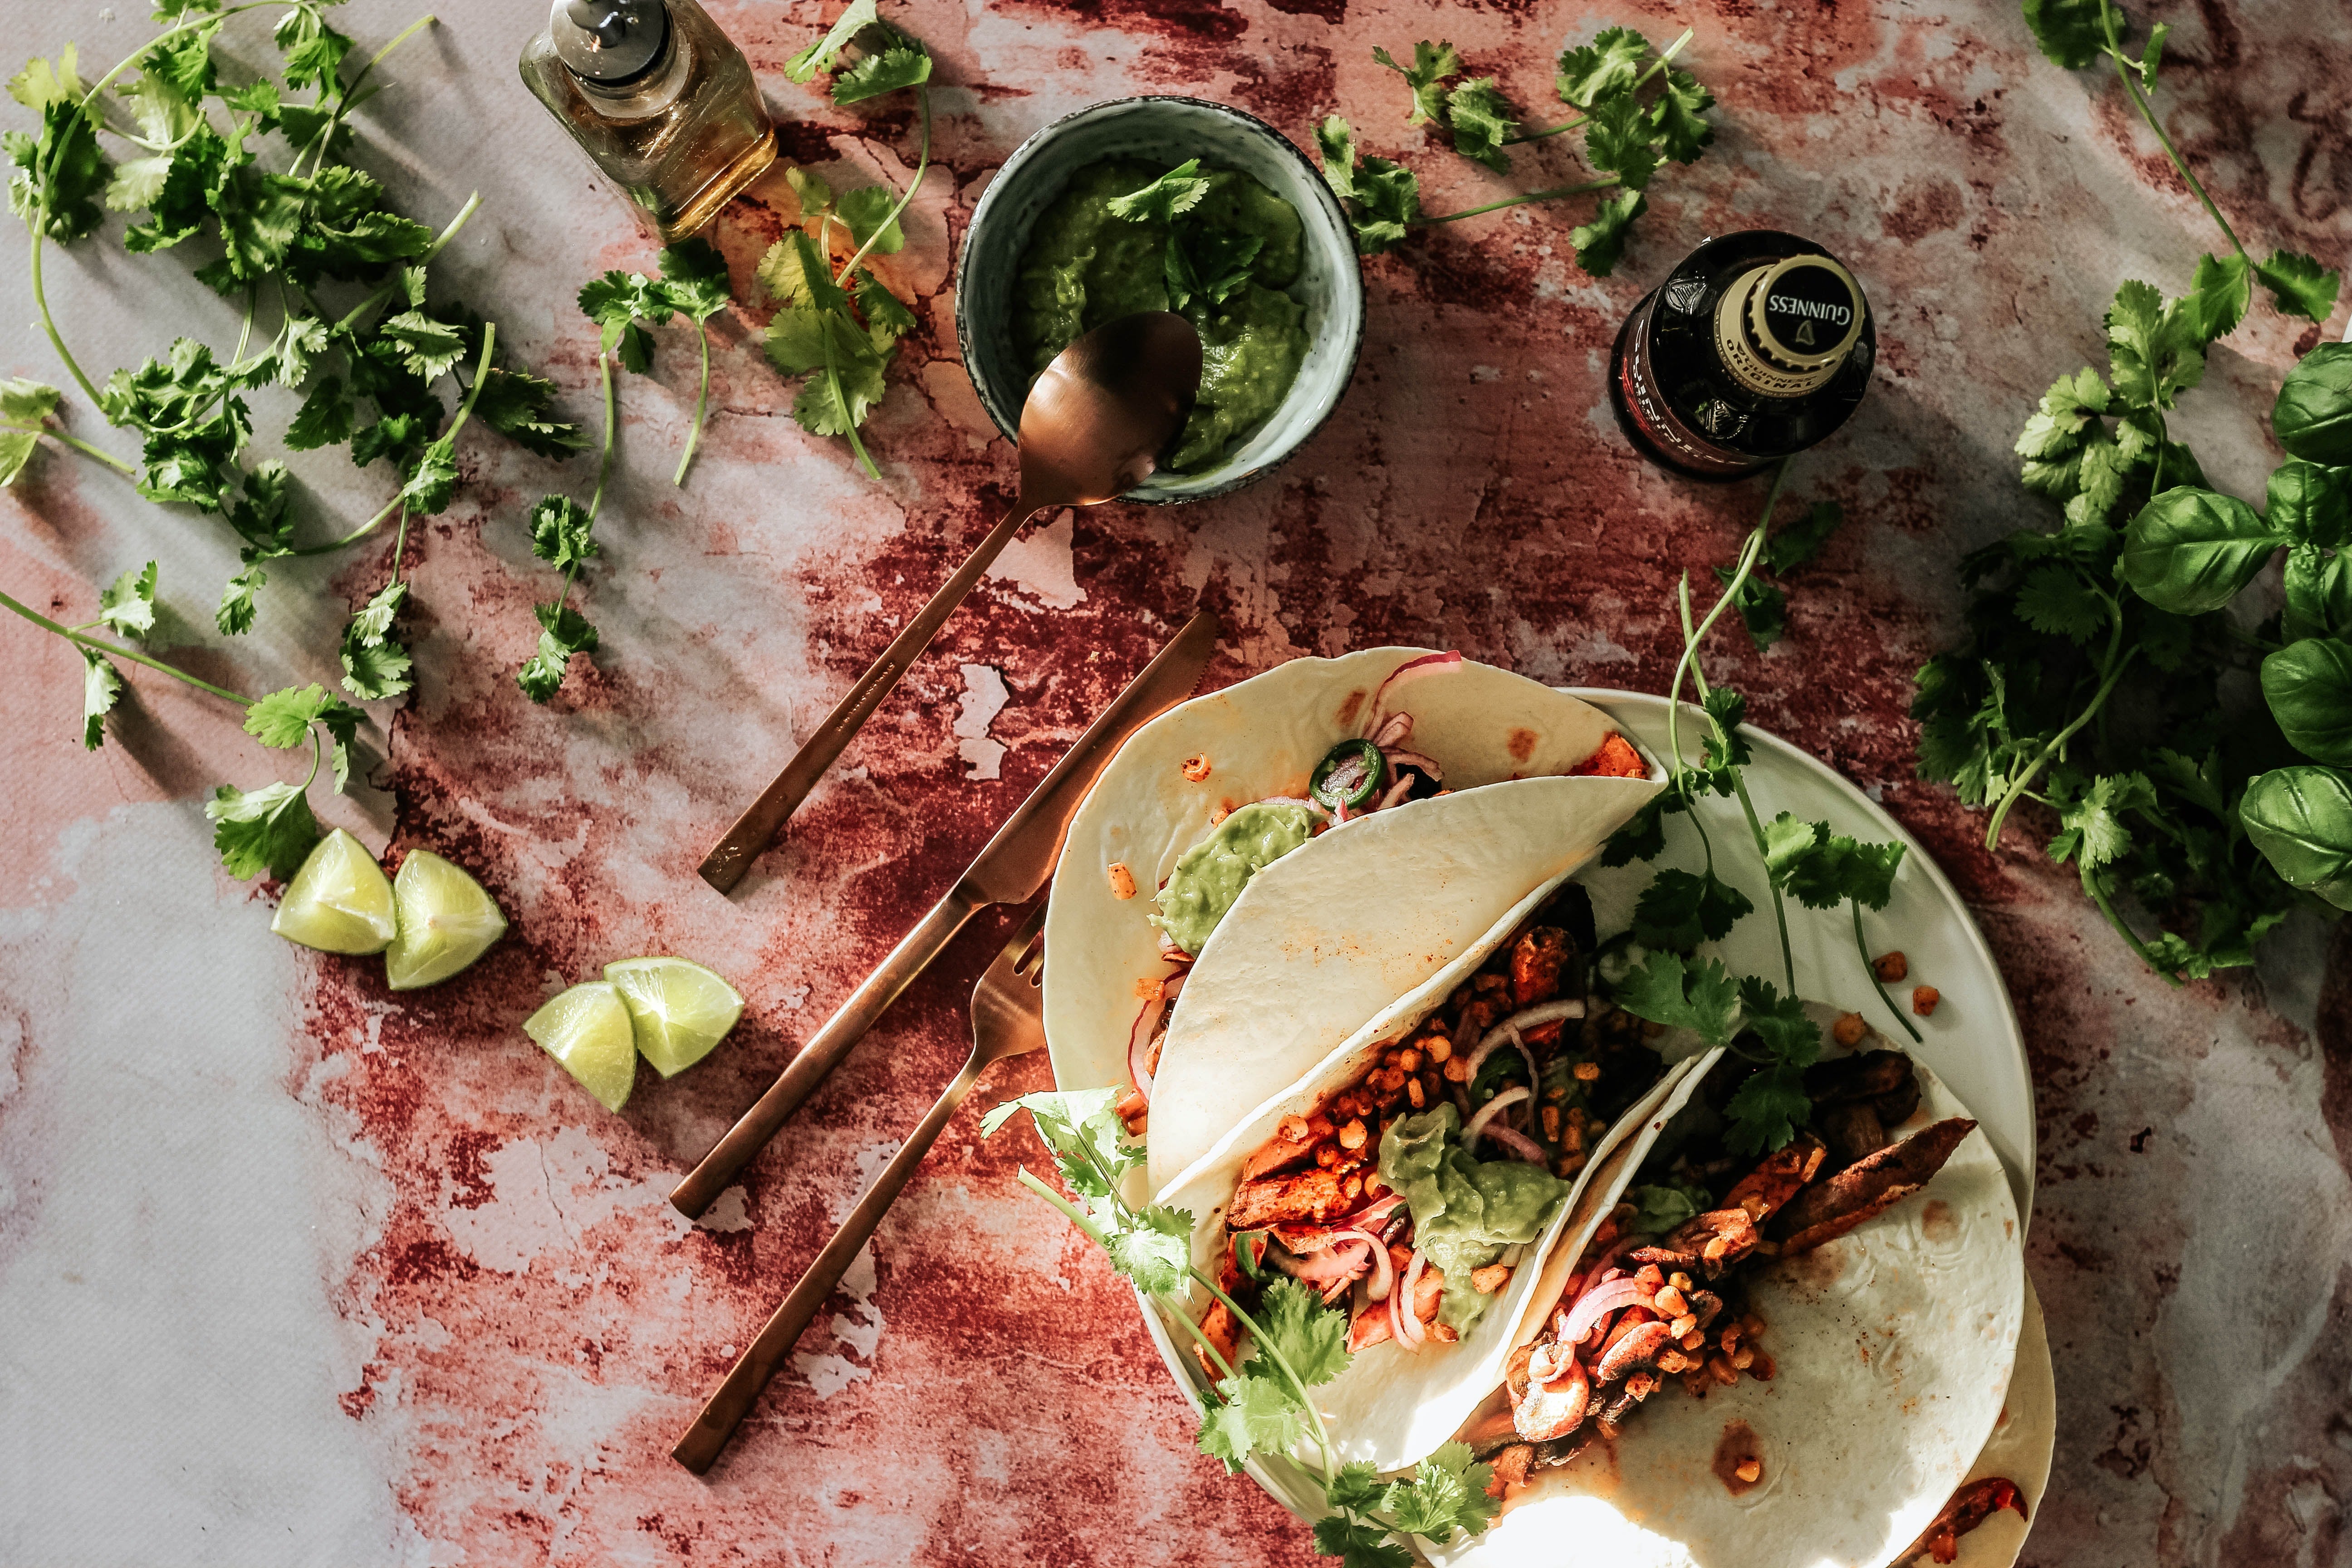 Chicken Cutlet Fajitas sitting on a table that has red and white splotches surrounded by cilantro basil and a bowl of guacamole.